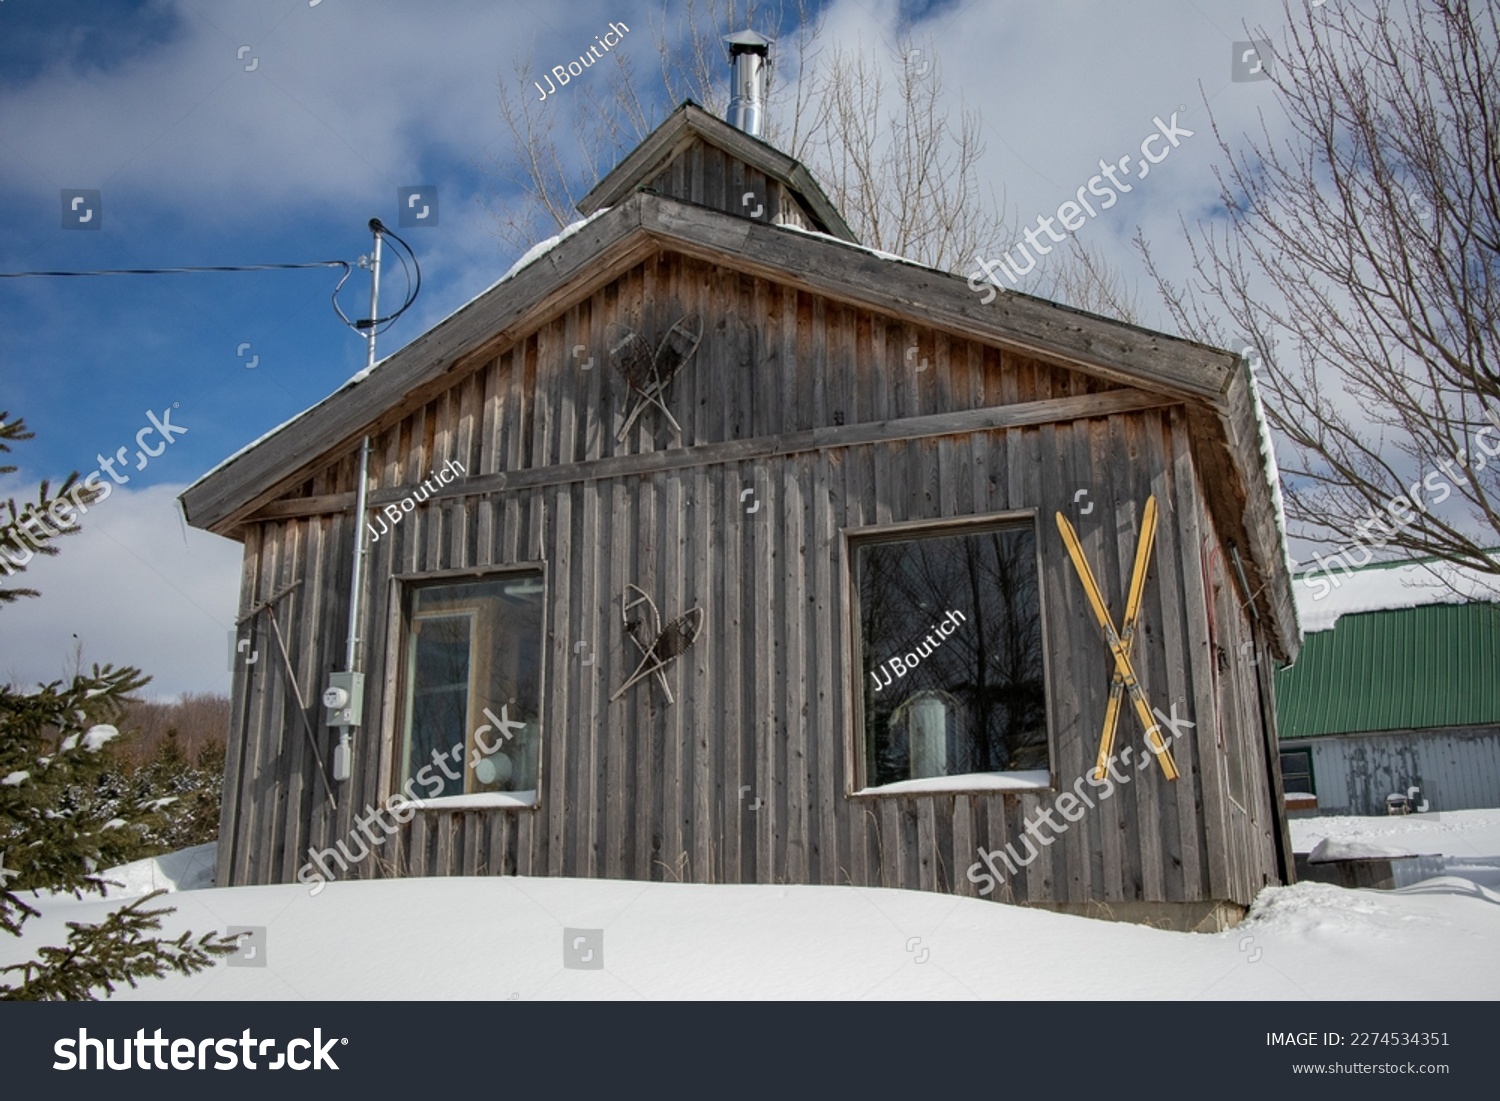 Sugar shack, old traditional barn in Quebec, Canada, surrounded by snow with vintage ski decoration #2274534351